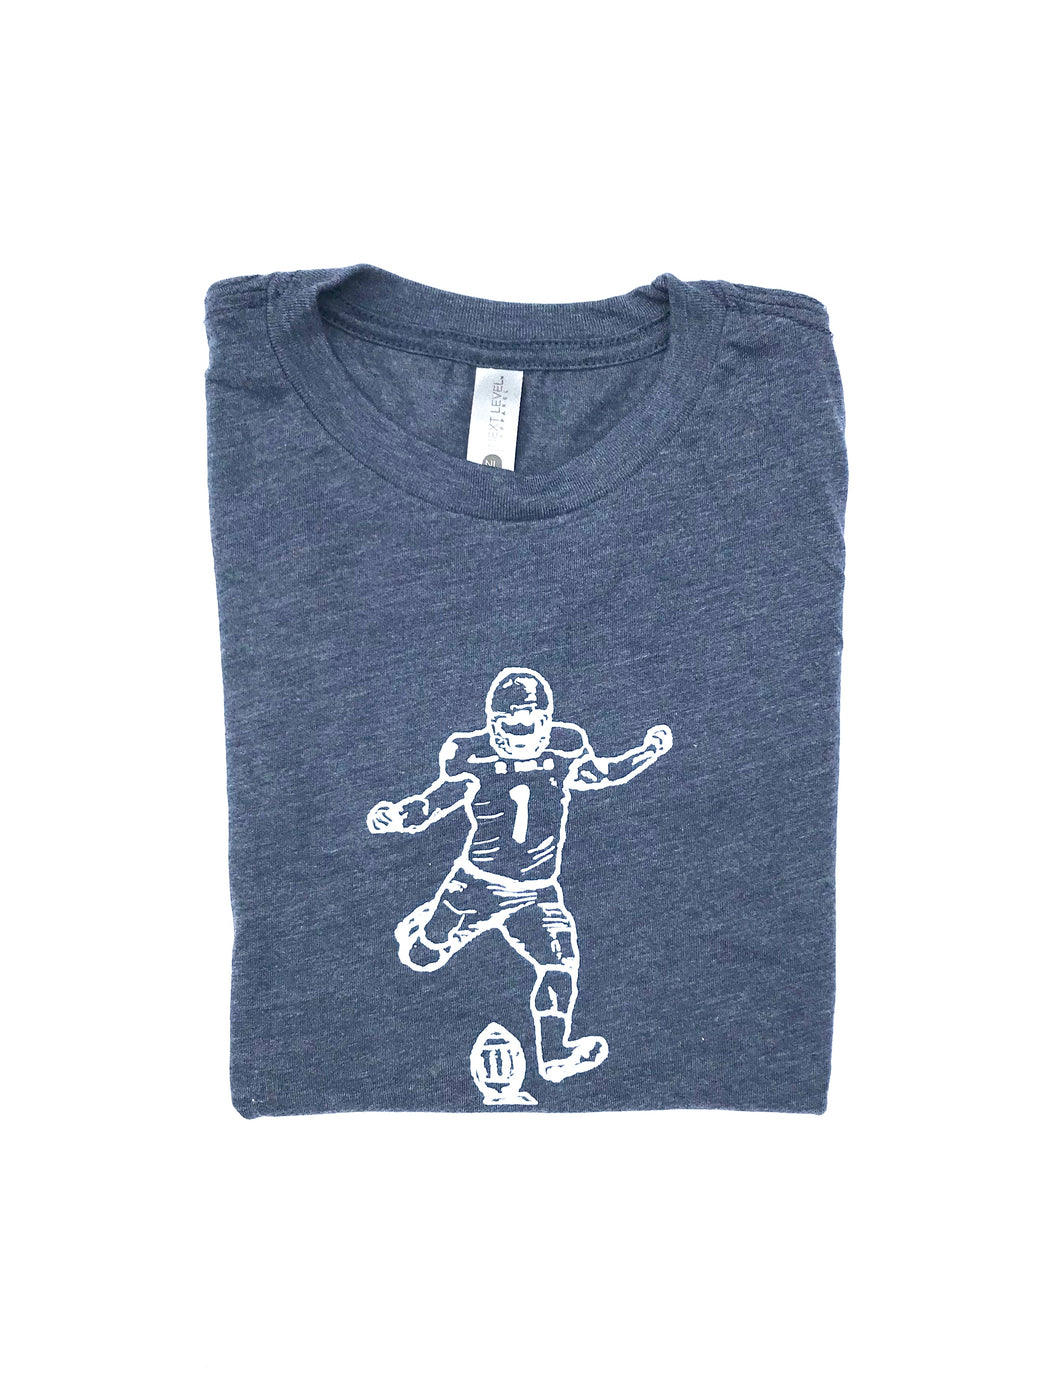 Kicker: Navy — bright and durable children's clothes, with love from Tennessee!